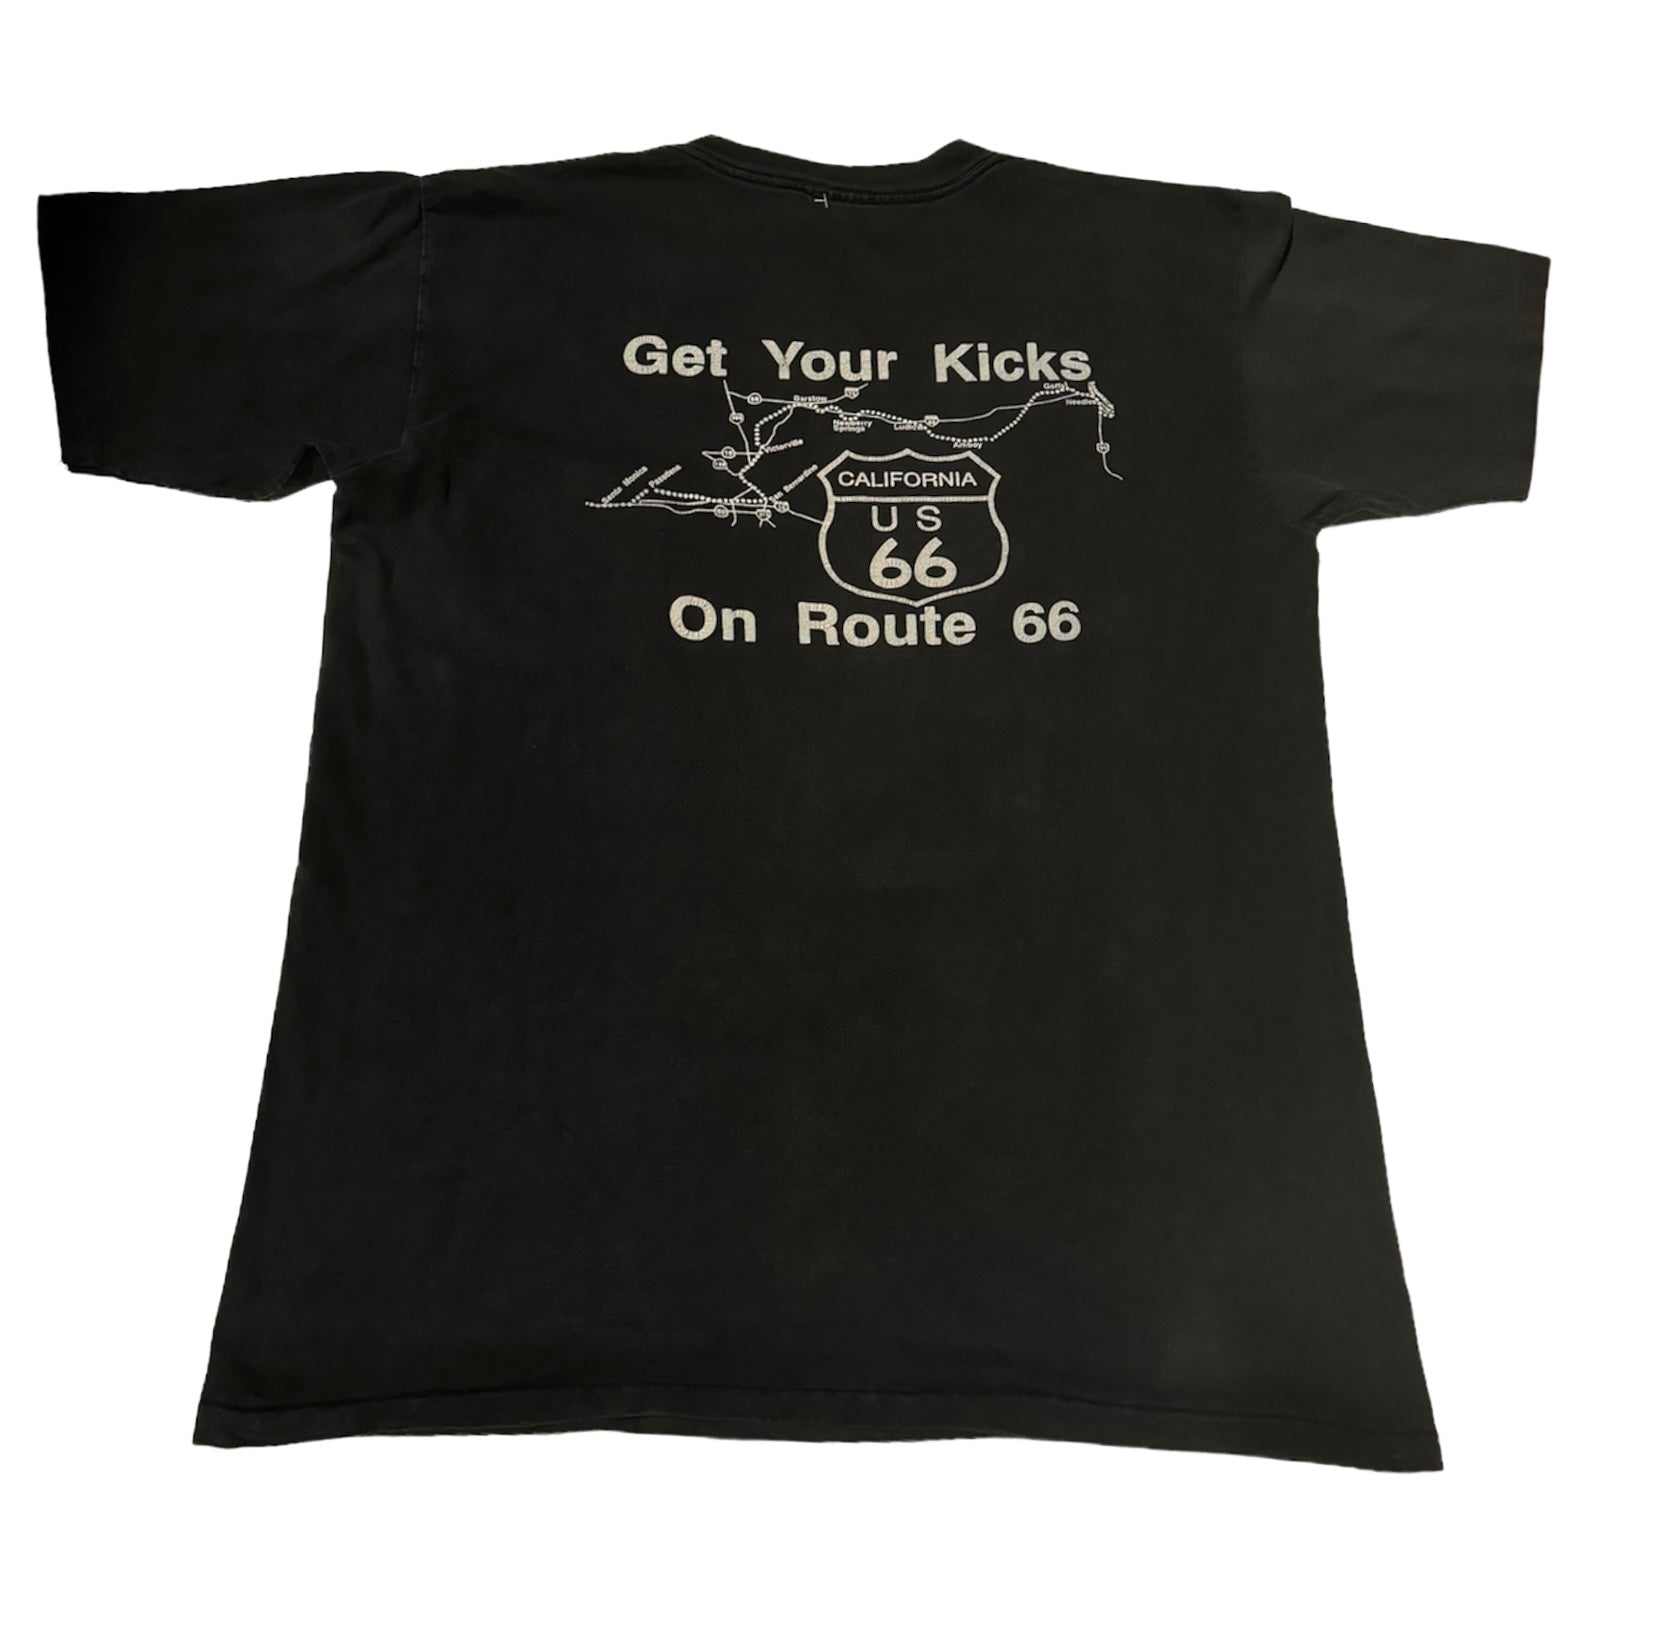 Vintage ‘Get Your Kicks on Route 66’ T-shirt (XXL)